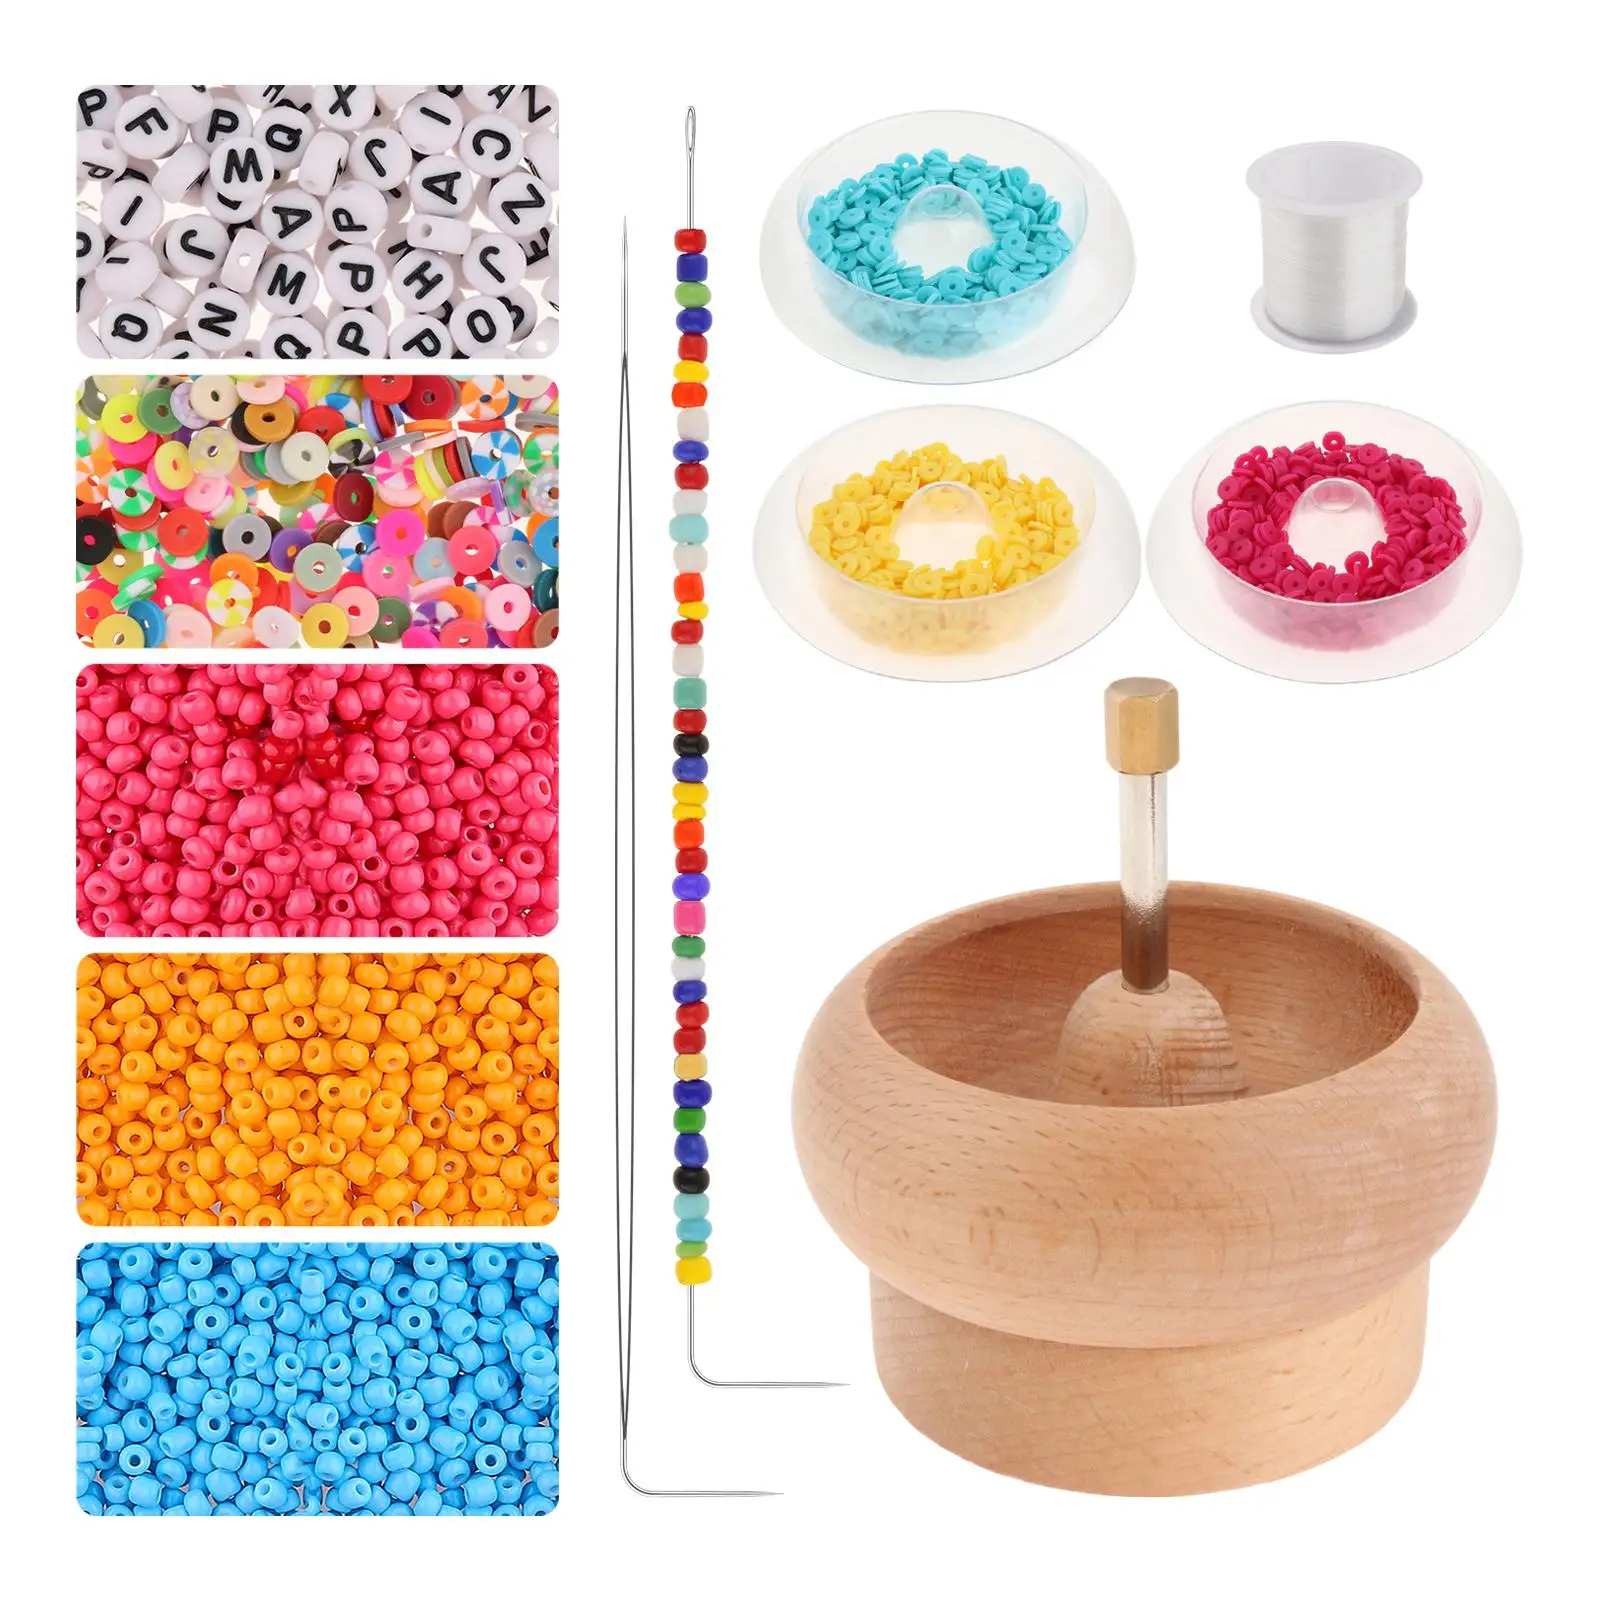 Bead Spinner Double Bowl Waist Beads Kit With Bead Spinner Waist Bead  Spinner And Beads Kit With 4 Bowls 2 Needles And 1000Pcs - AliExpress